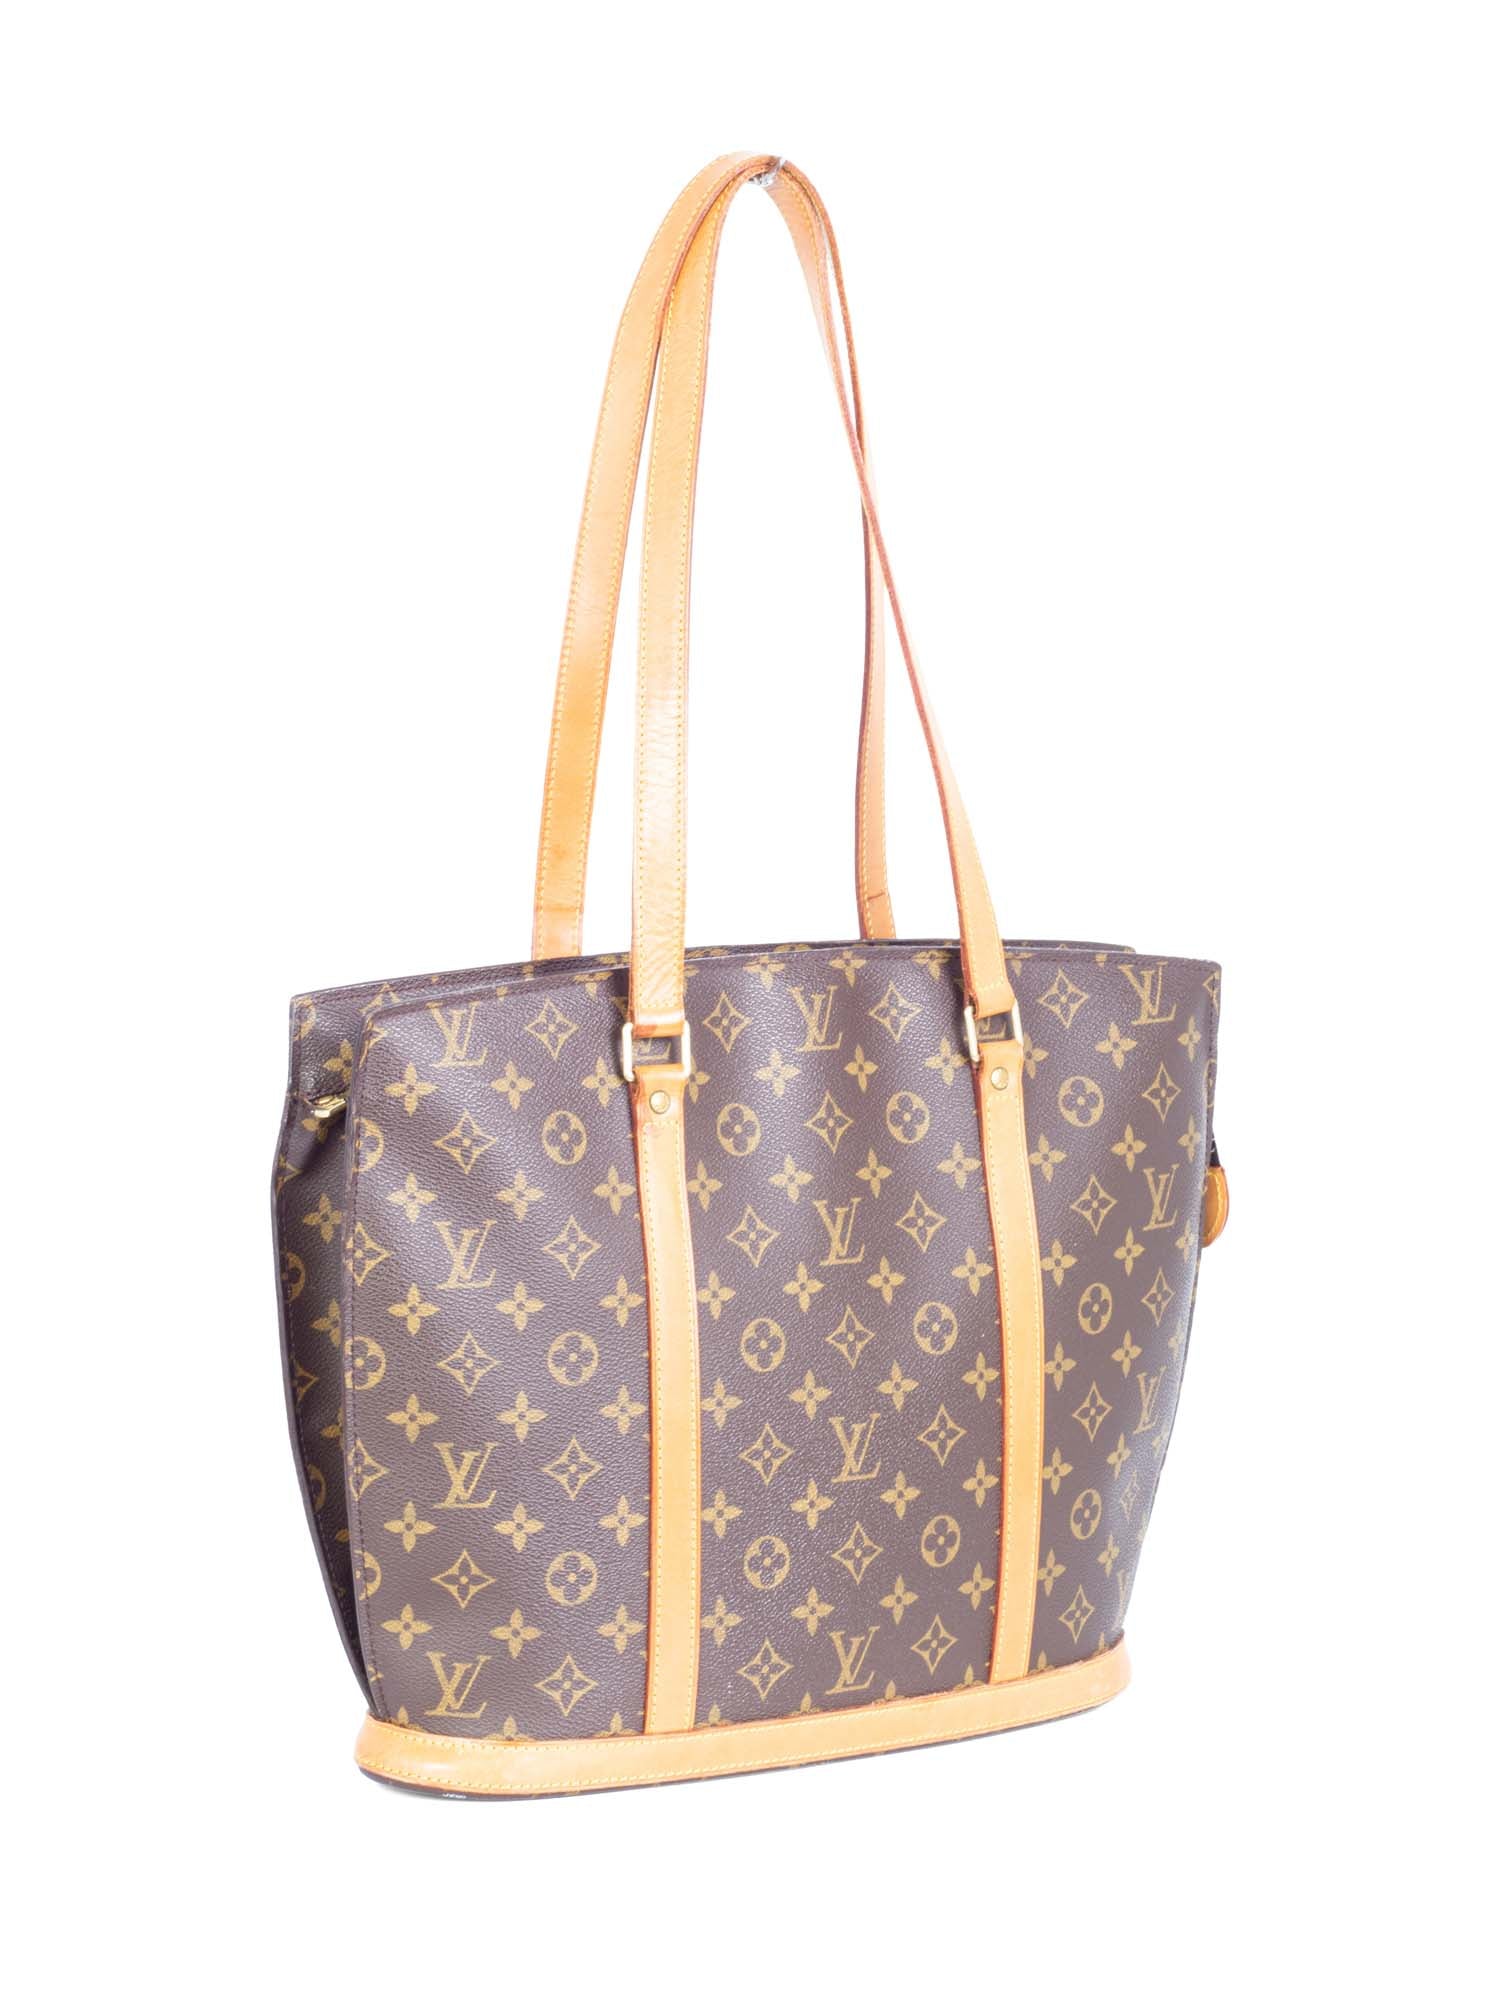 How to Spot Fake Louis Vuitton Bags 9 Ways to Tell Real Purses